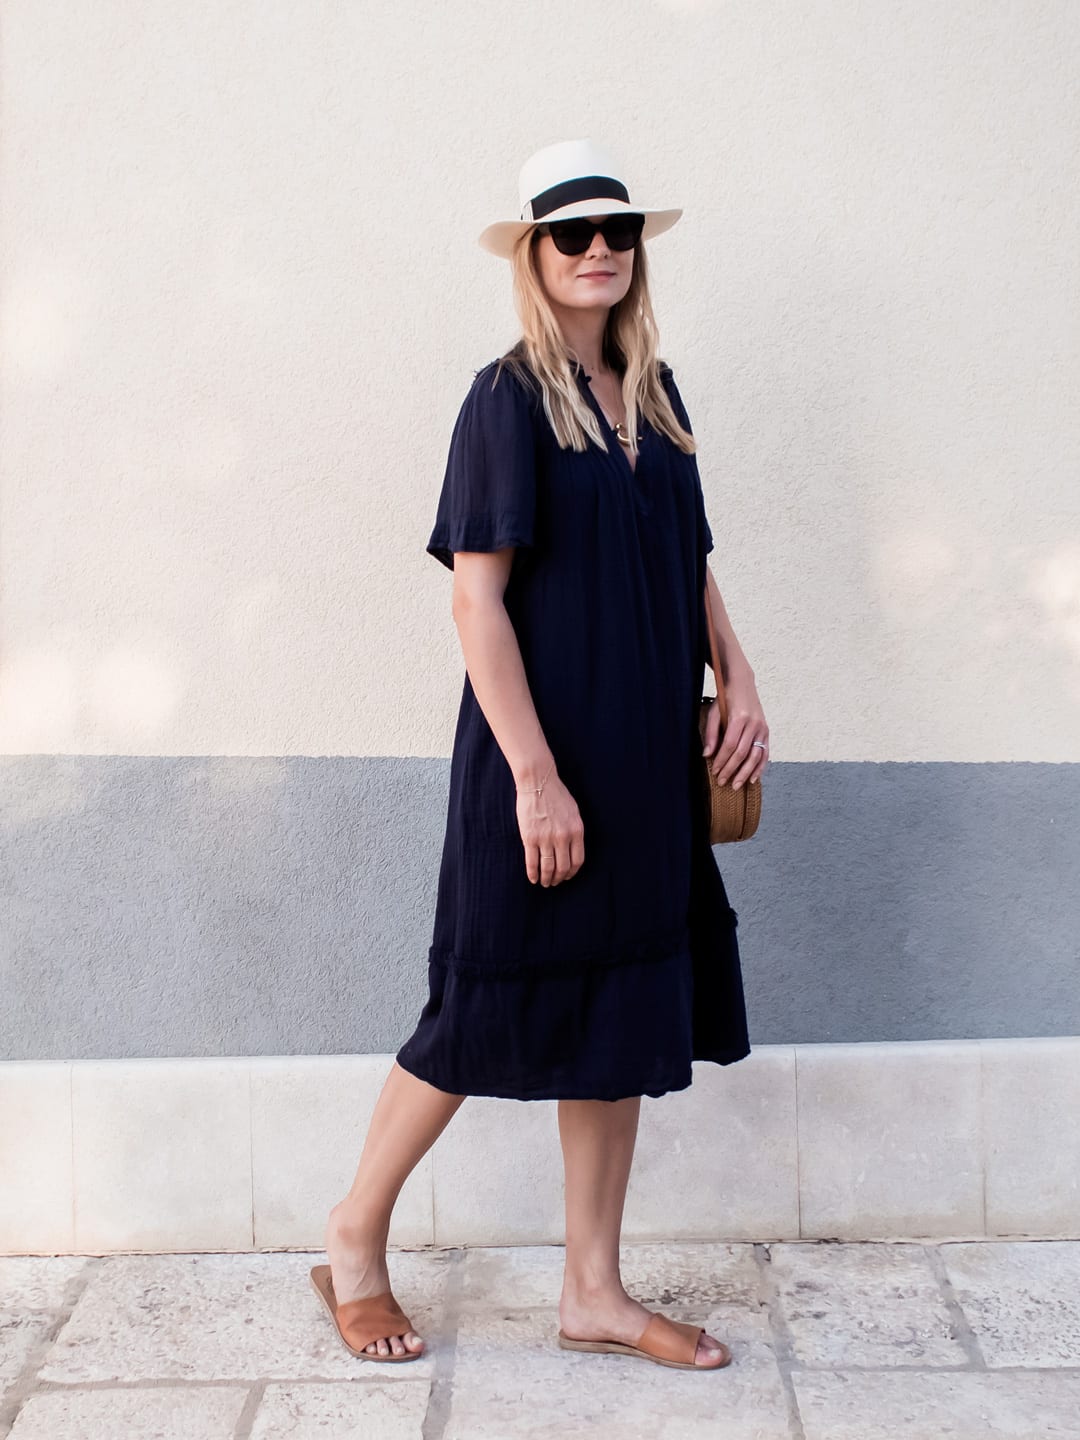 Out-Of-Office | Raquel Allegra Peasant Dress, Davina Mulford Panama, Ancient Greek Sandals, Wood/Grey Woven Bag